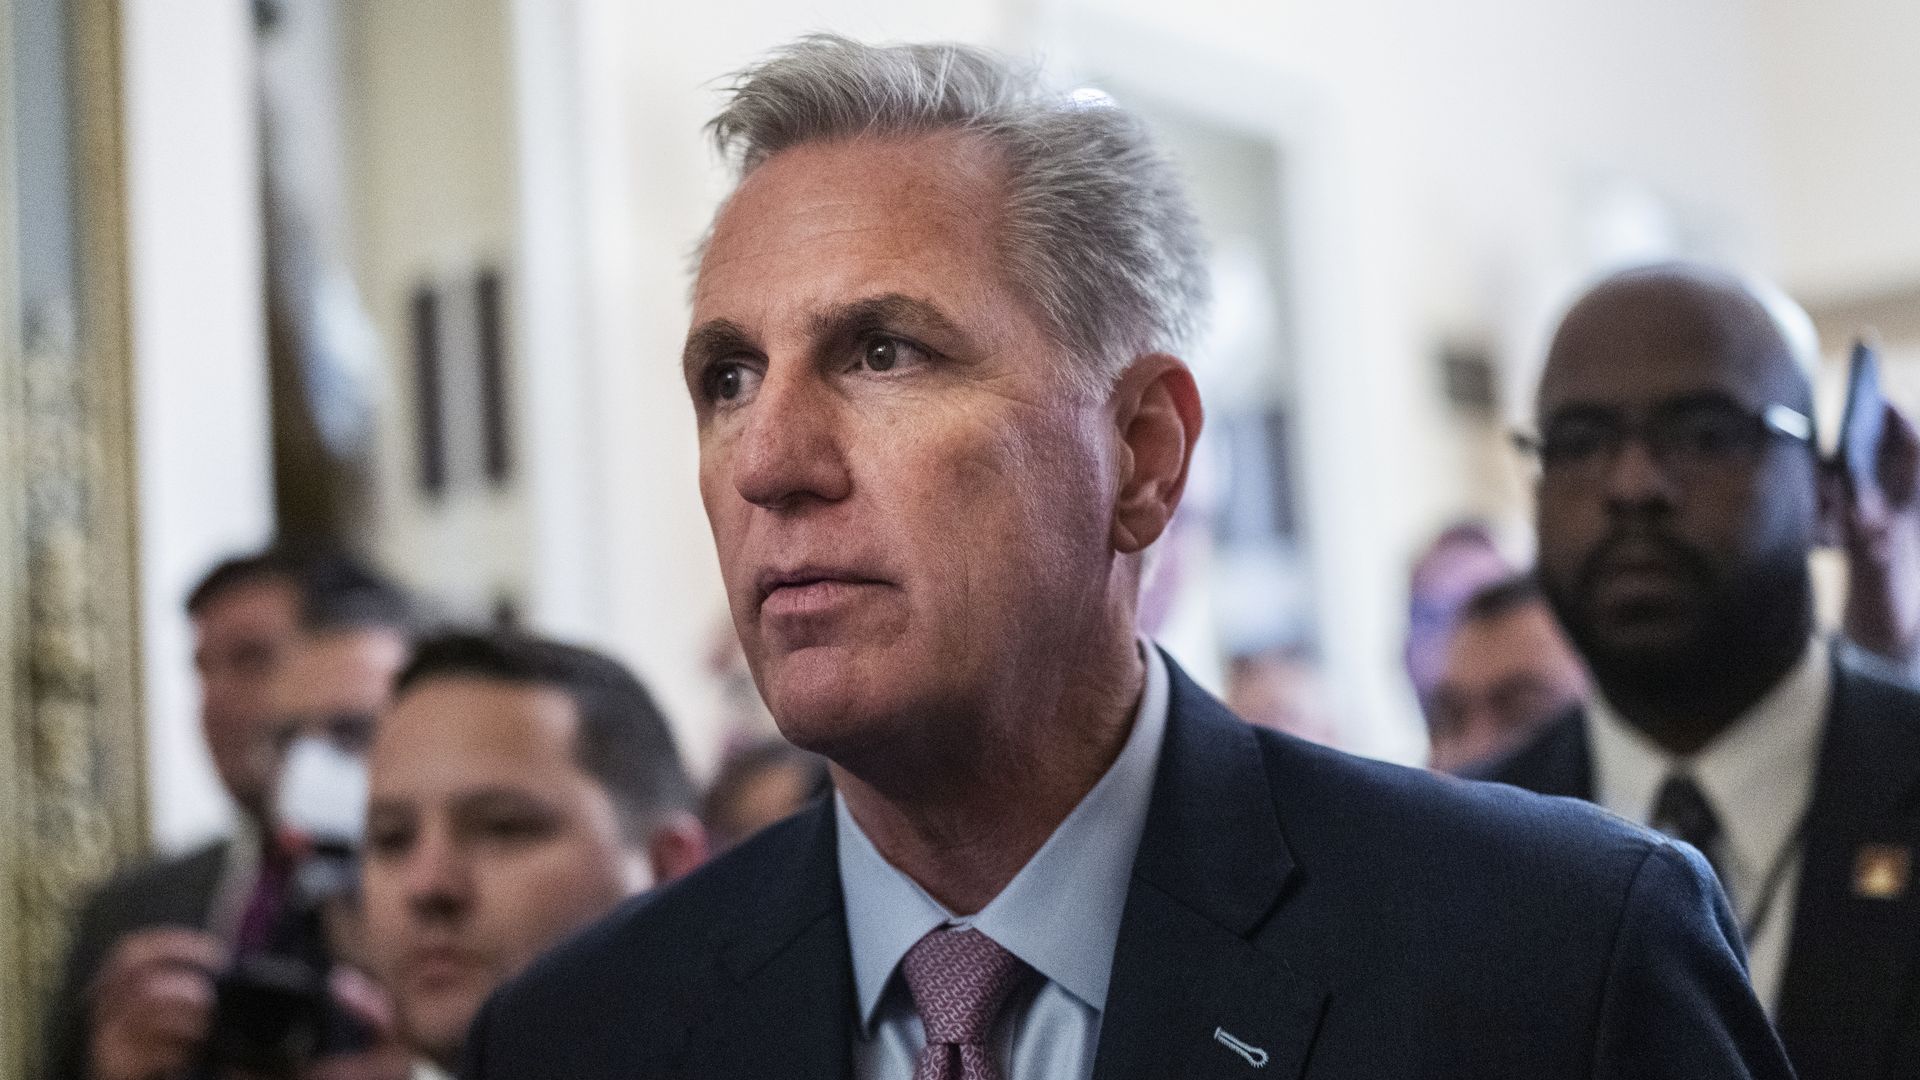 Photo of Kevin McCarthy with a somber expression on his face